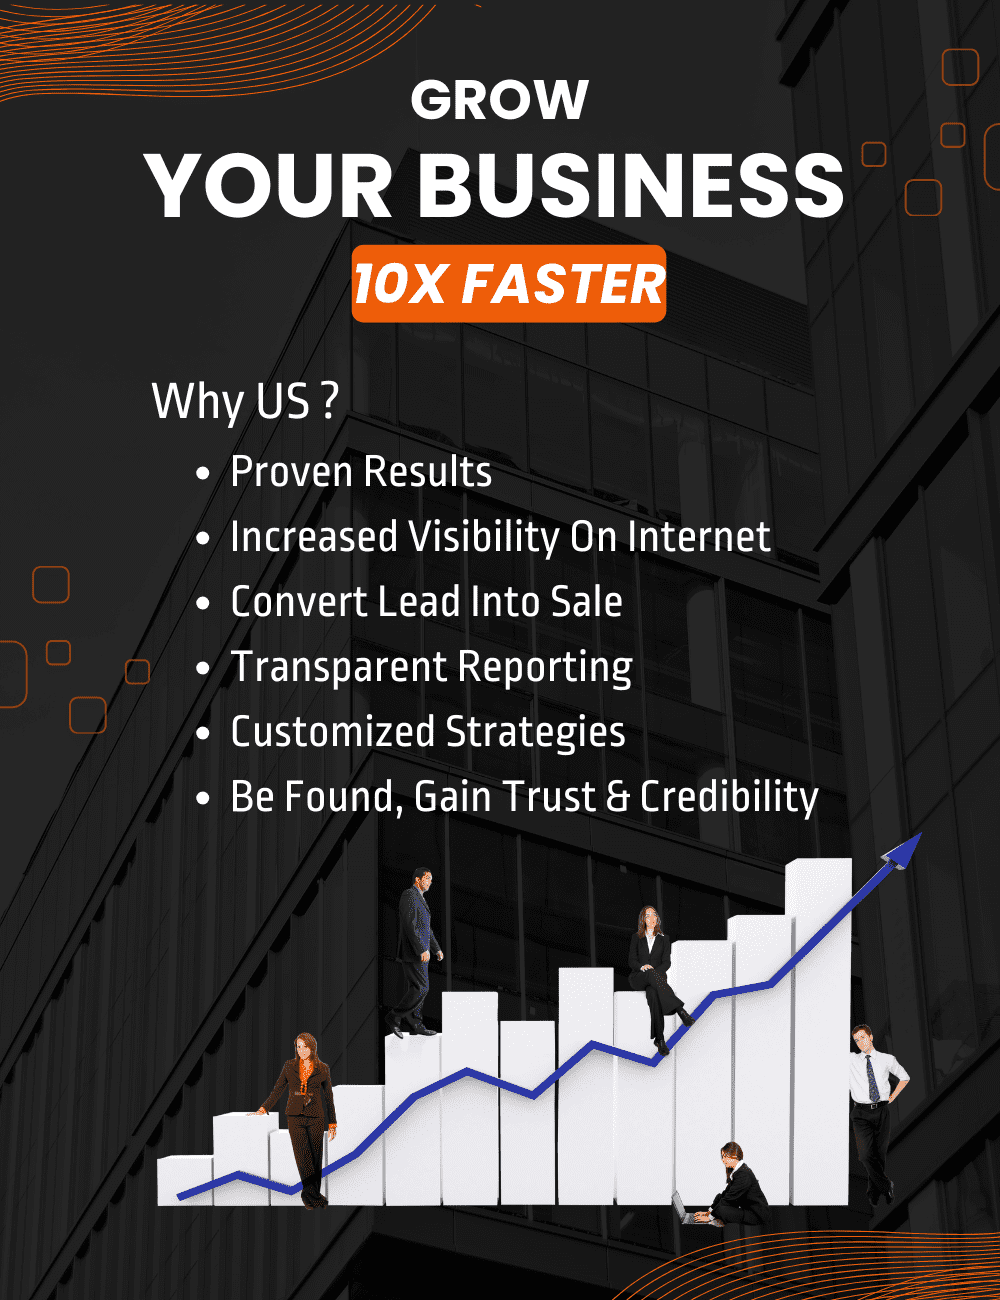 Markipie help business to grow 10x and help them to scale with proven results and increased thier online visibility